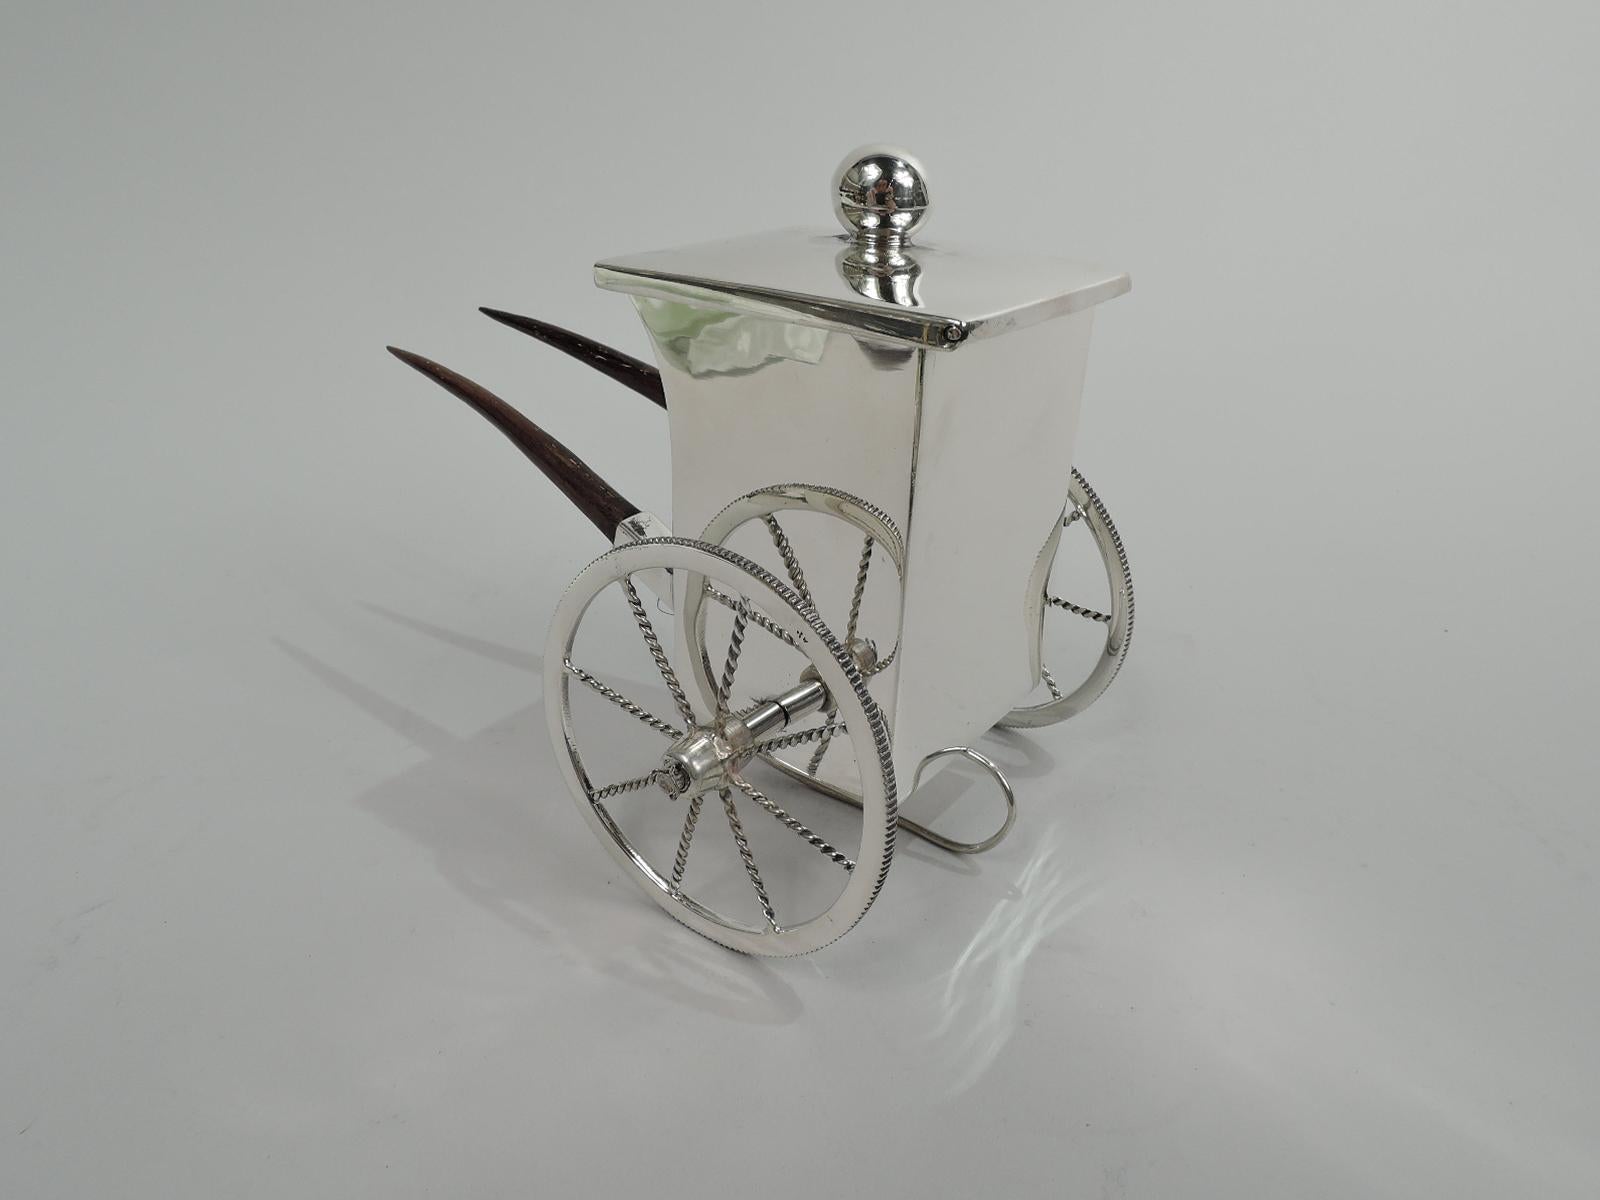 Japanese Mid-Century Modern sterling silver pushcart cigarette cup. Rectilinear with stained-wood handles. Cover hinged with ball finial for keeping tobacco products fresh and dry. Wheels have ribbed tread and twisted spokes, and they rotate. A